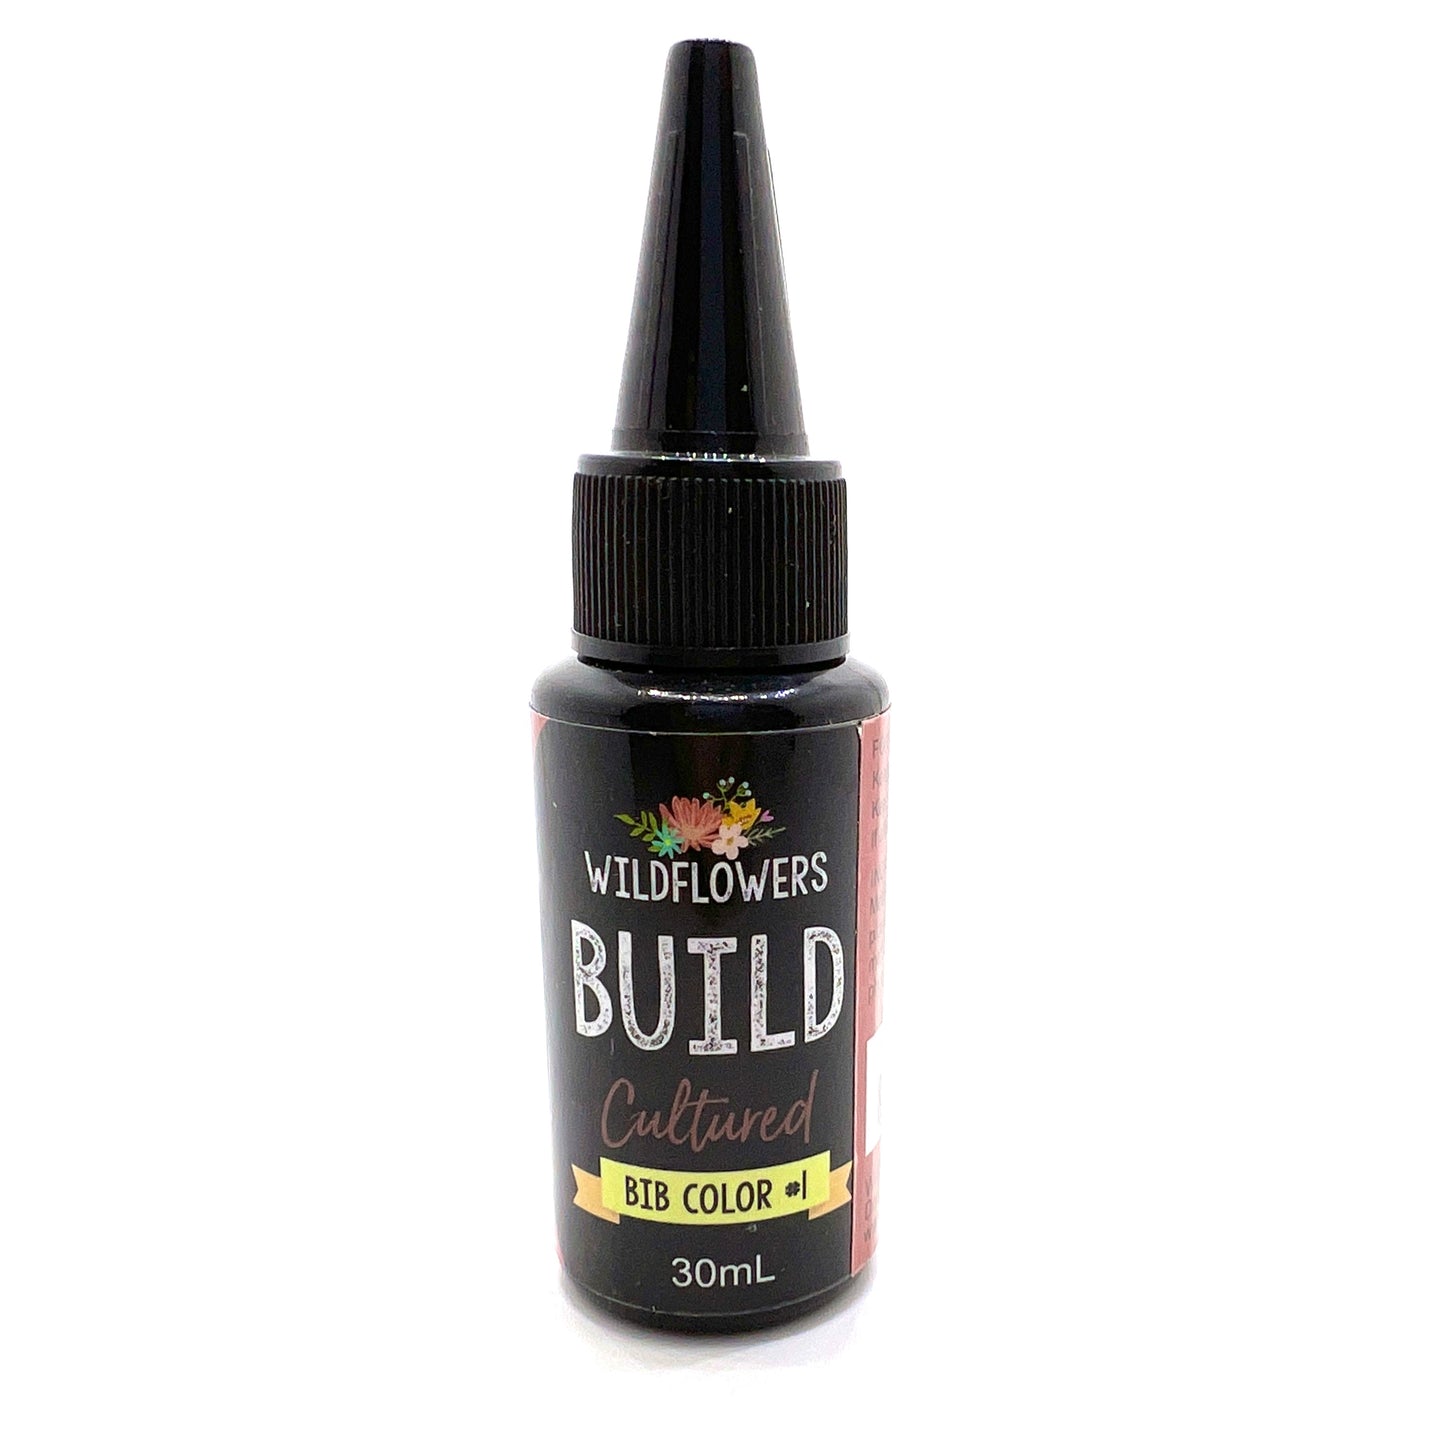 Build in a Bottle - #1 Cultured